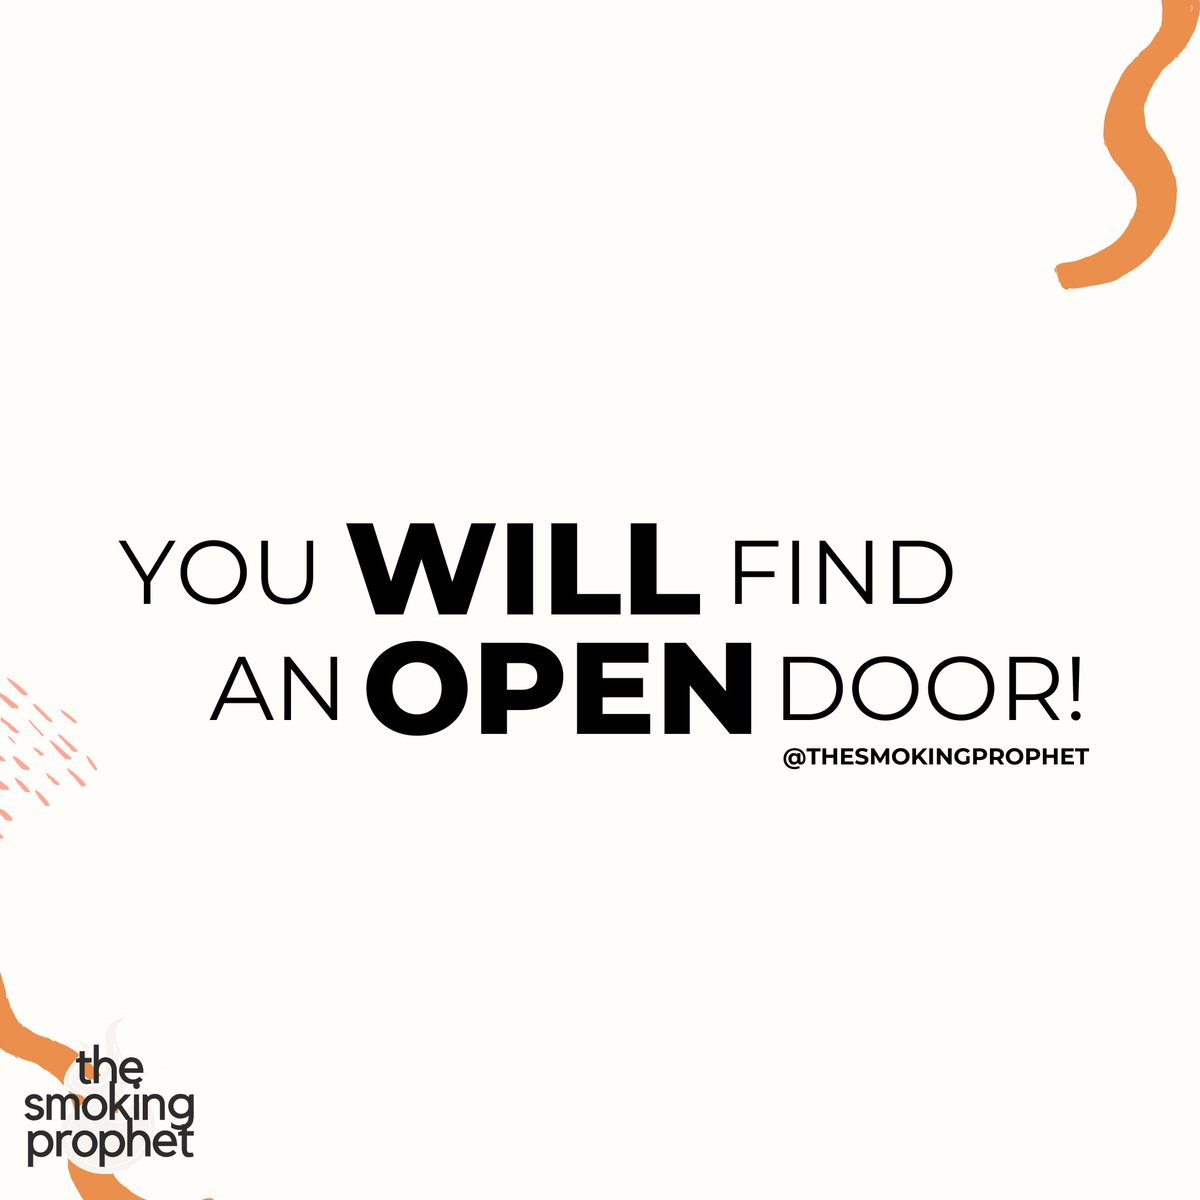 For every persistent one will get what he asks for. Every persistent seeker will discover what he longs for. And everyone who knocks persistently will one day find an open door.

#Matthew7v8 #goodword #propheticpodcast #inspo #propheticword #BibleQuotes